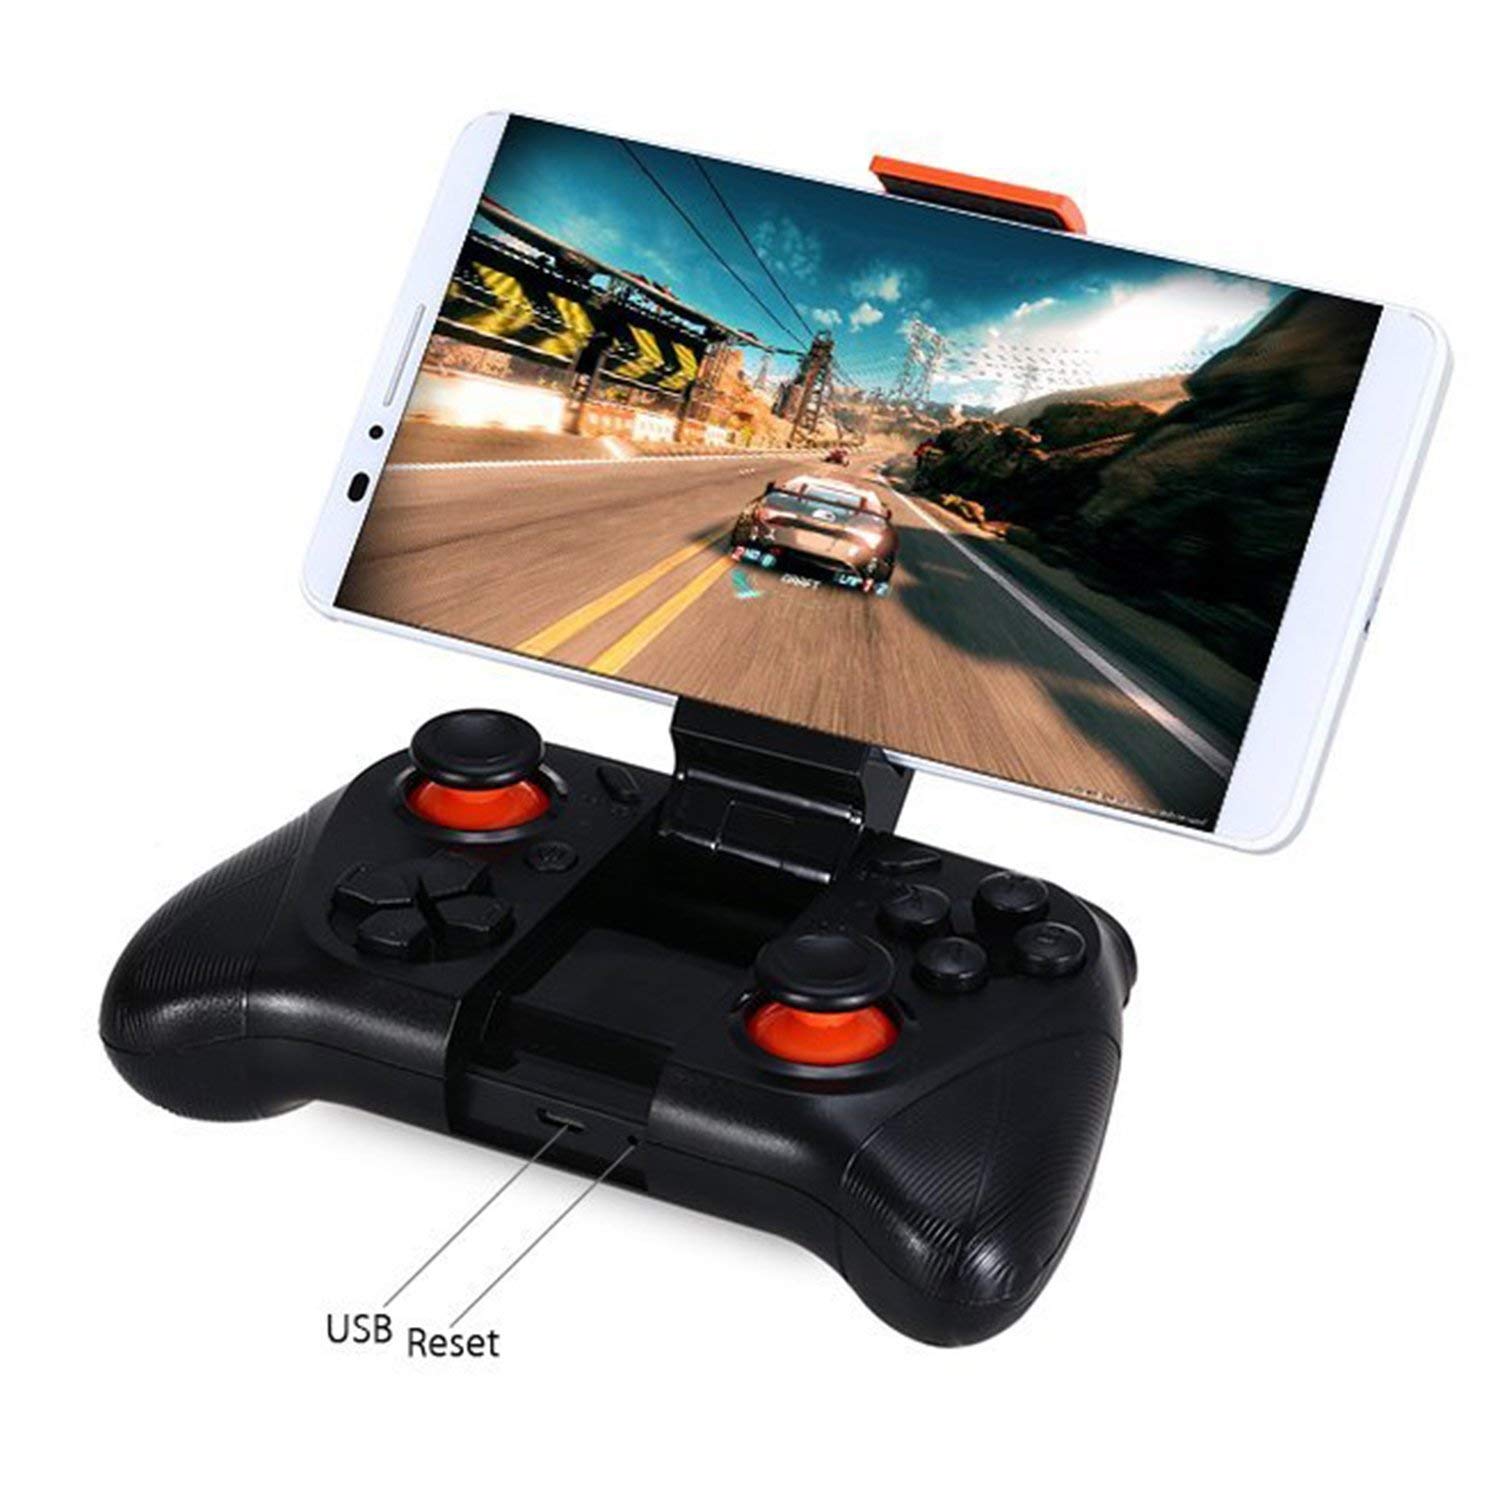 wireless pubg game controller for Android and iOS